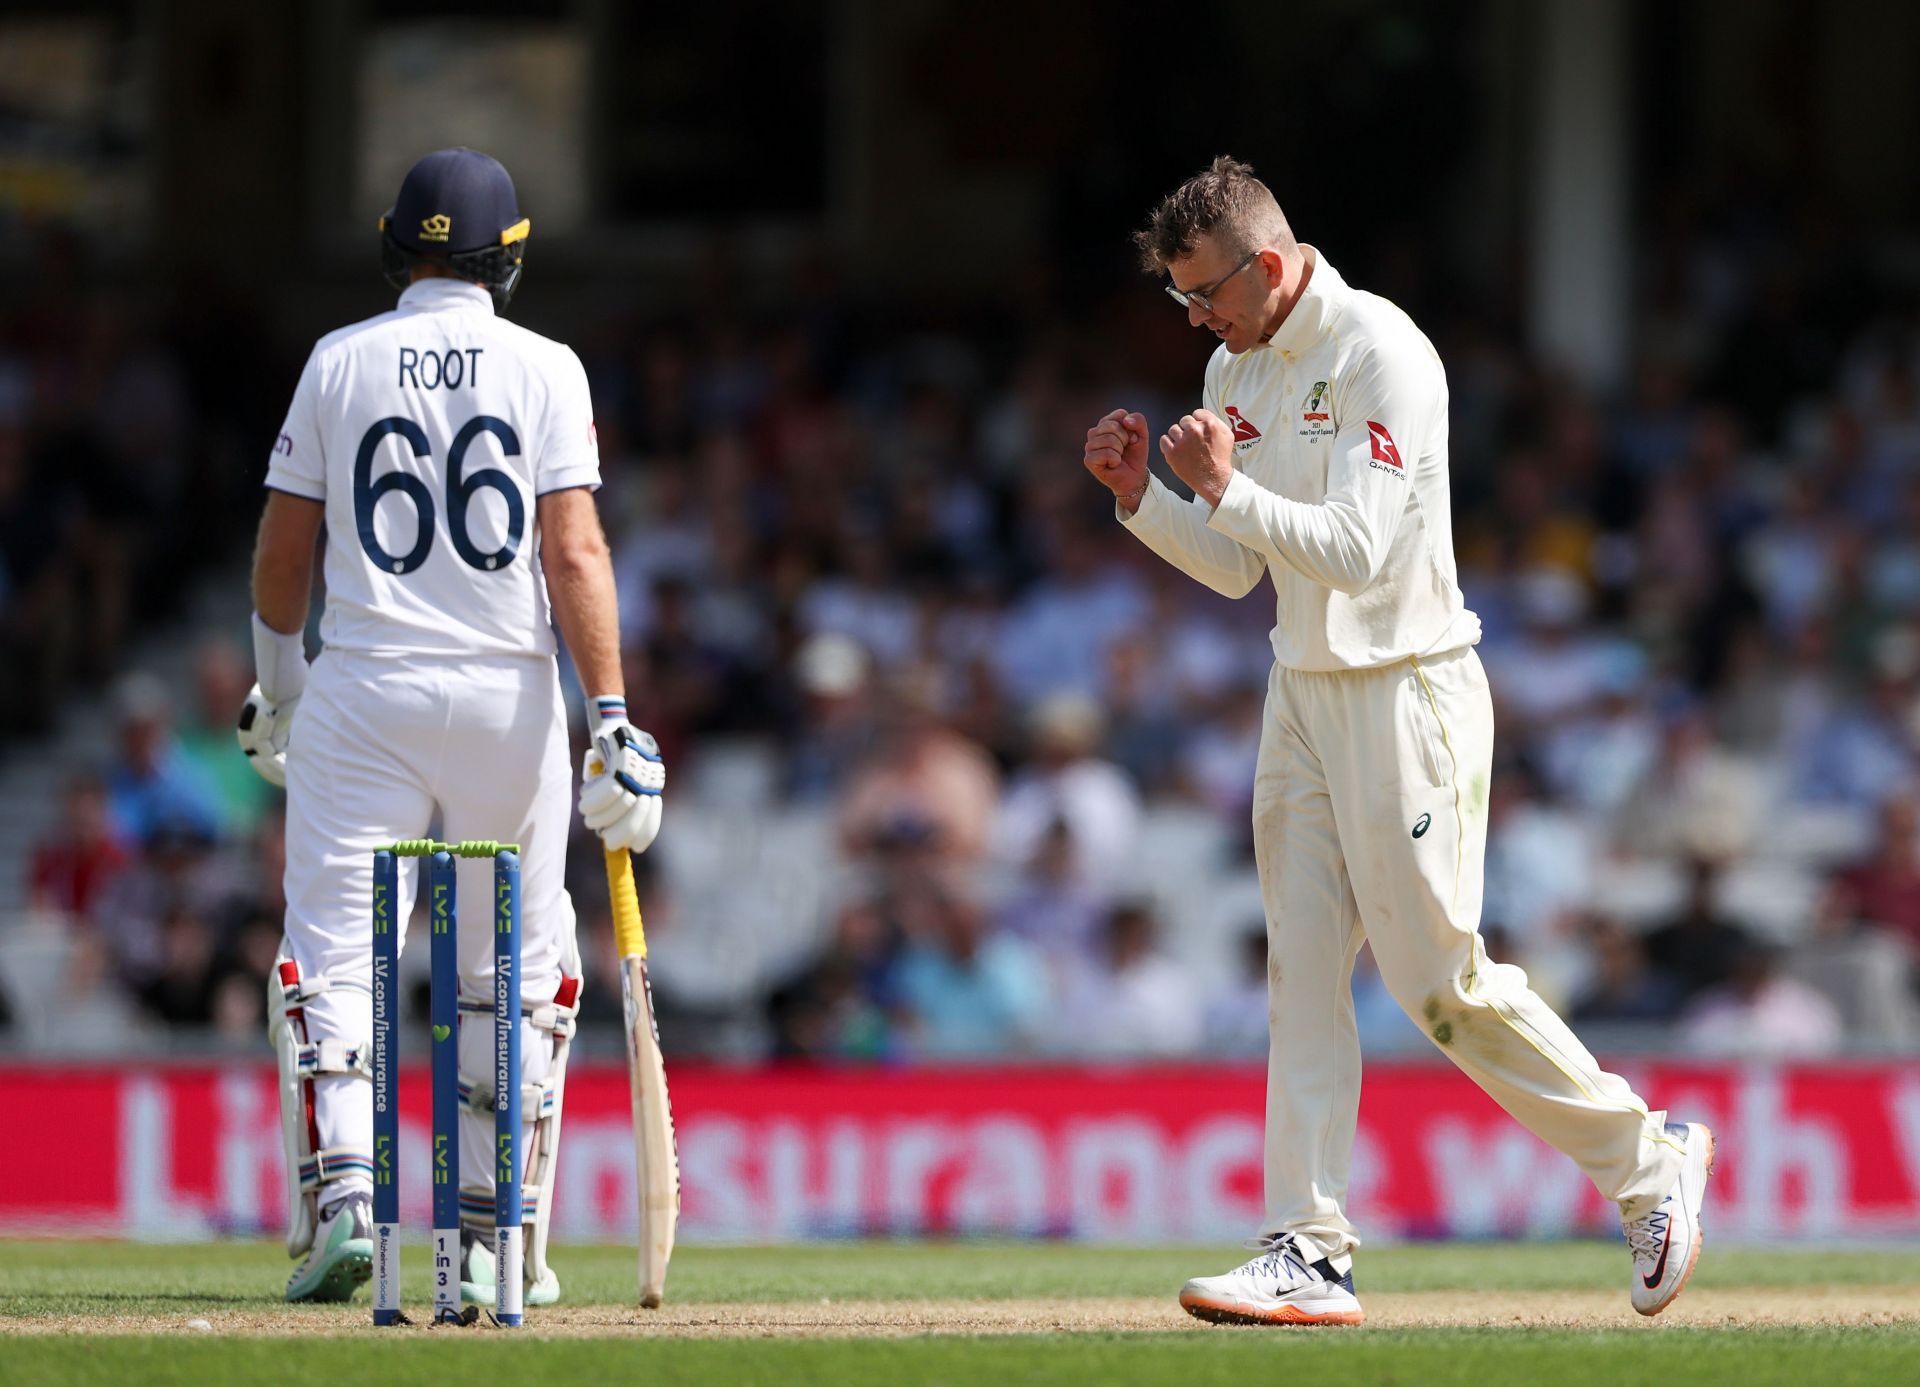 Todd Murphy celebrates as he cleans up Joe Root. (Credits: Getty)